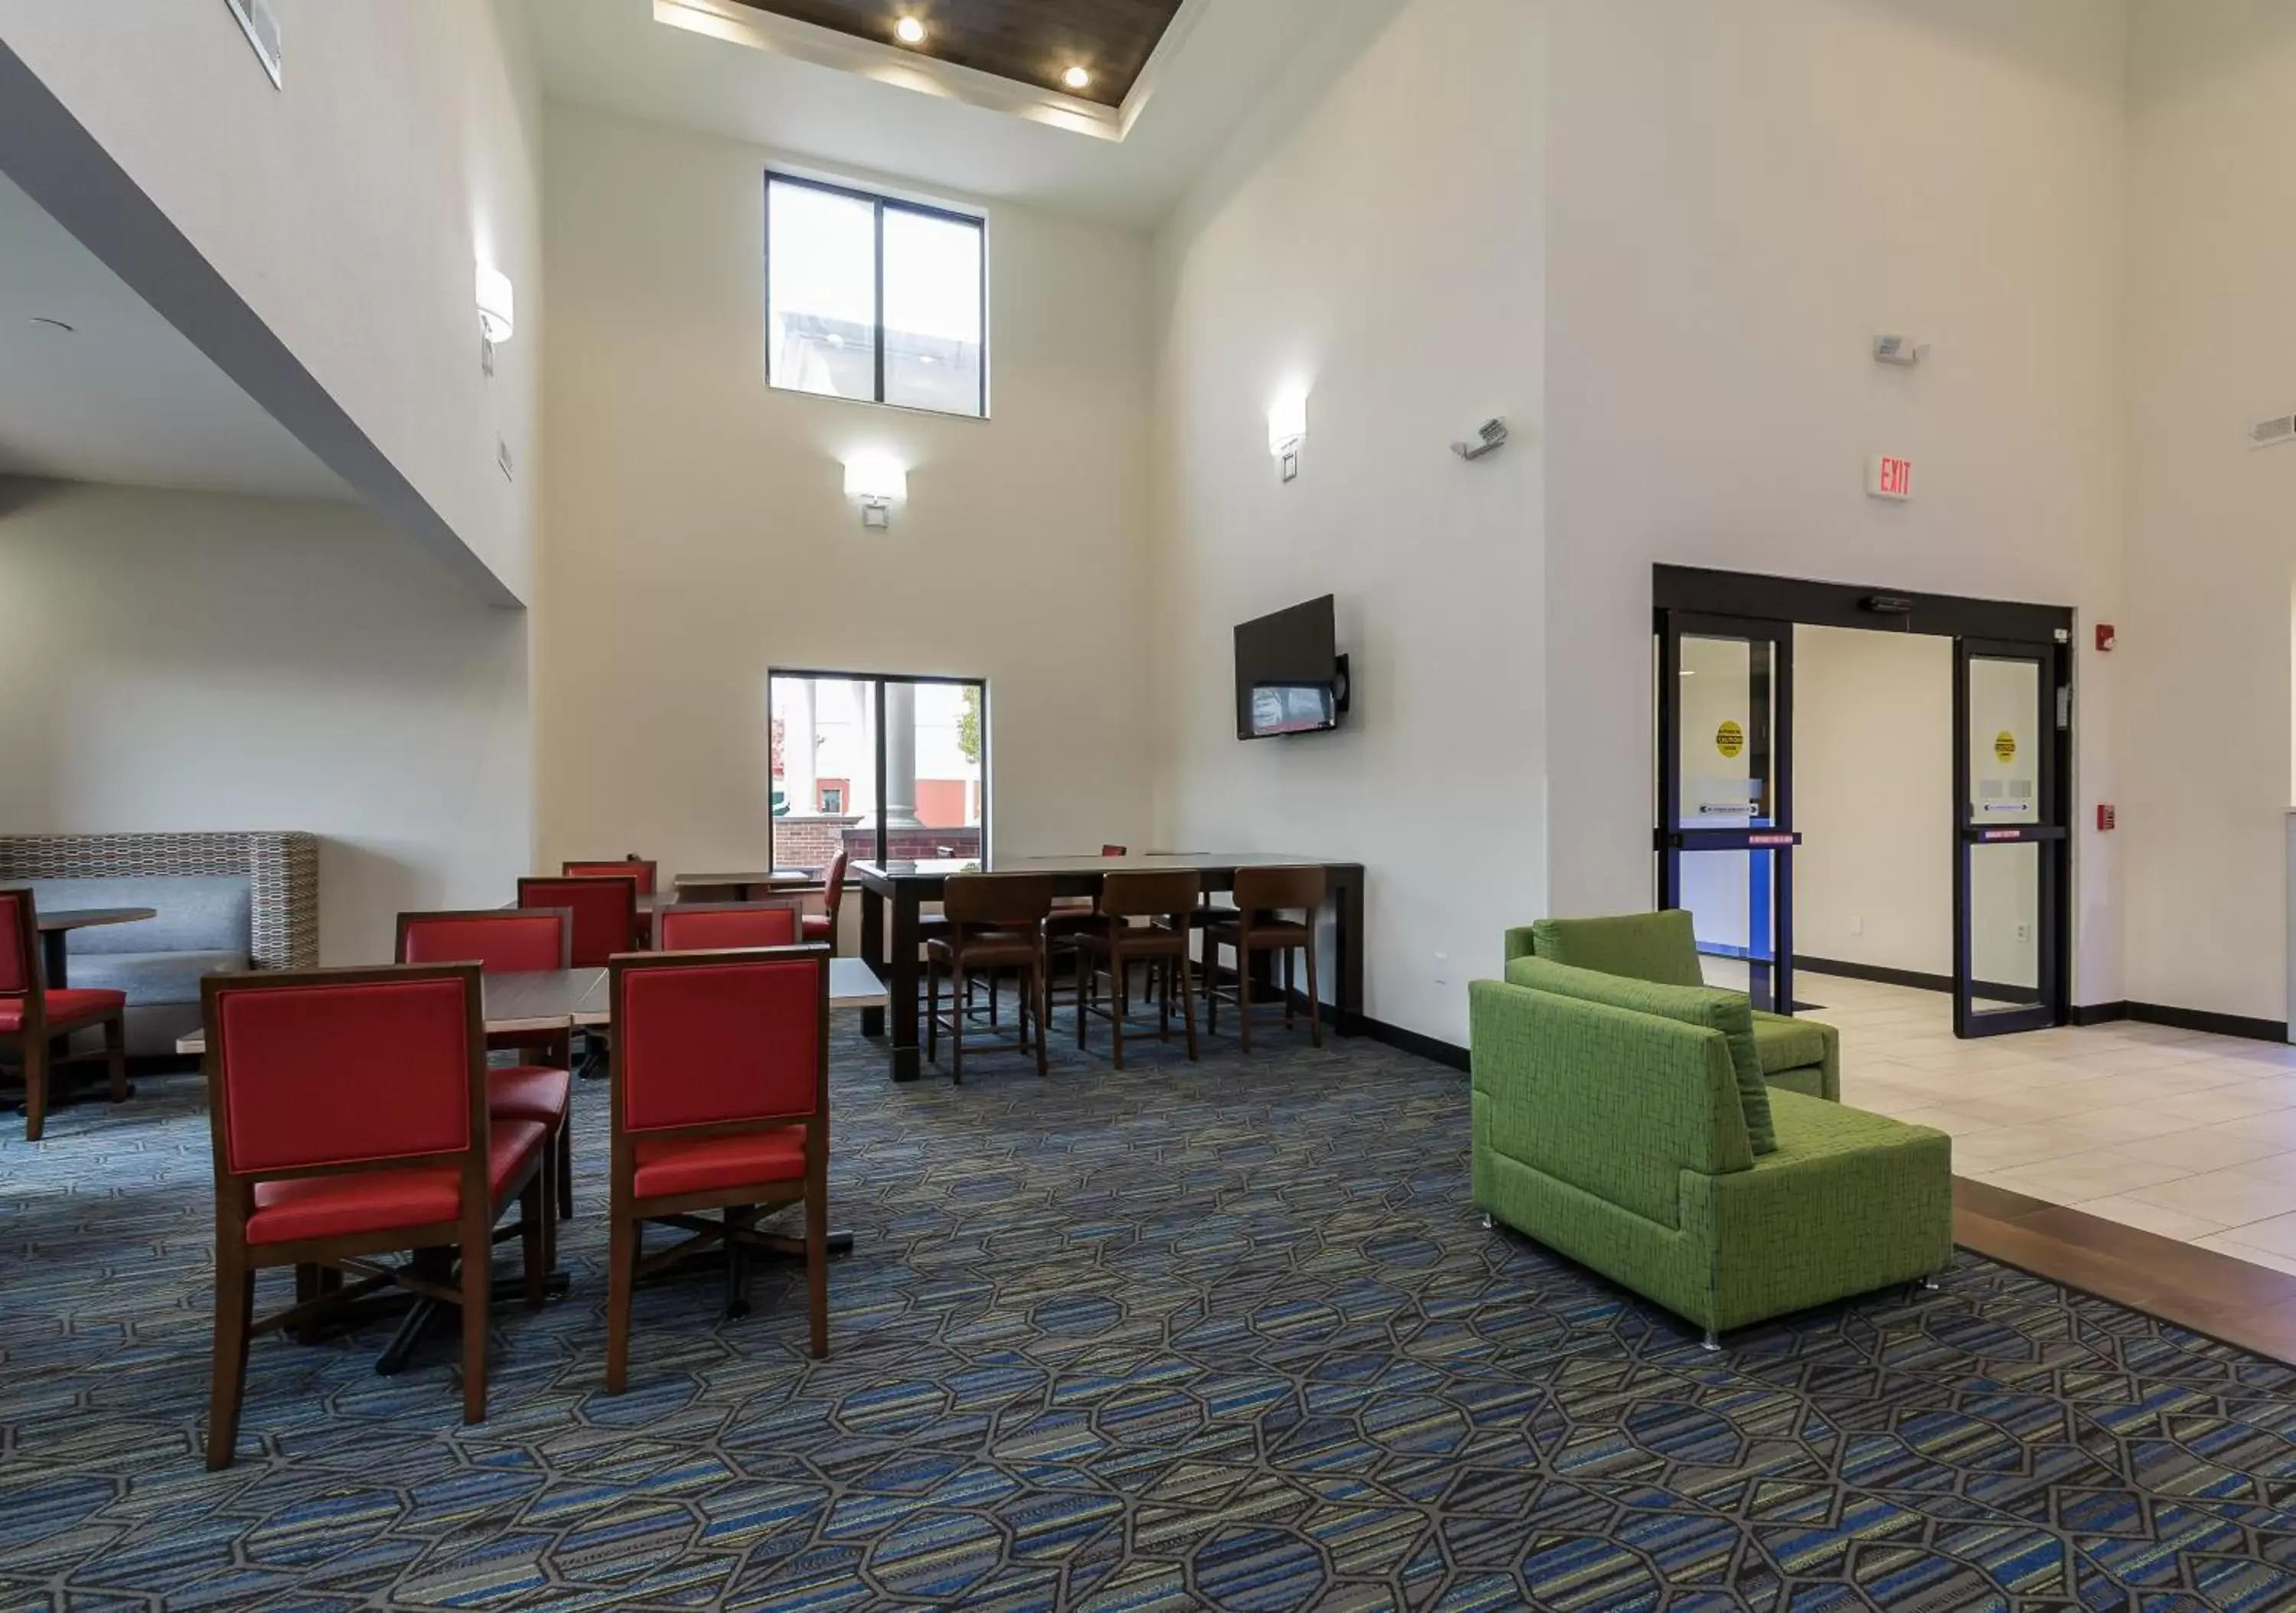 Lobby or reception in Holiday Inn Express & Suites - South Bend - Notre Dame Univ.